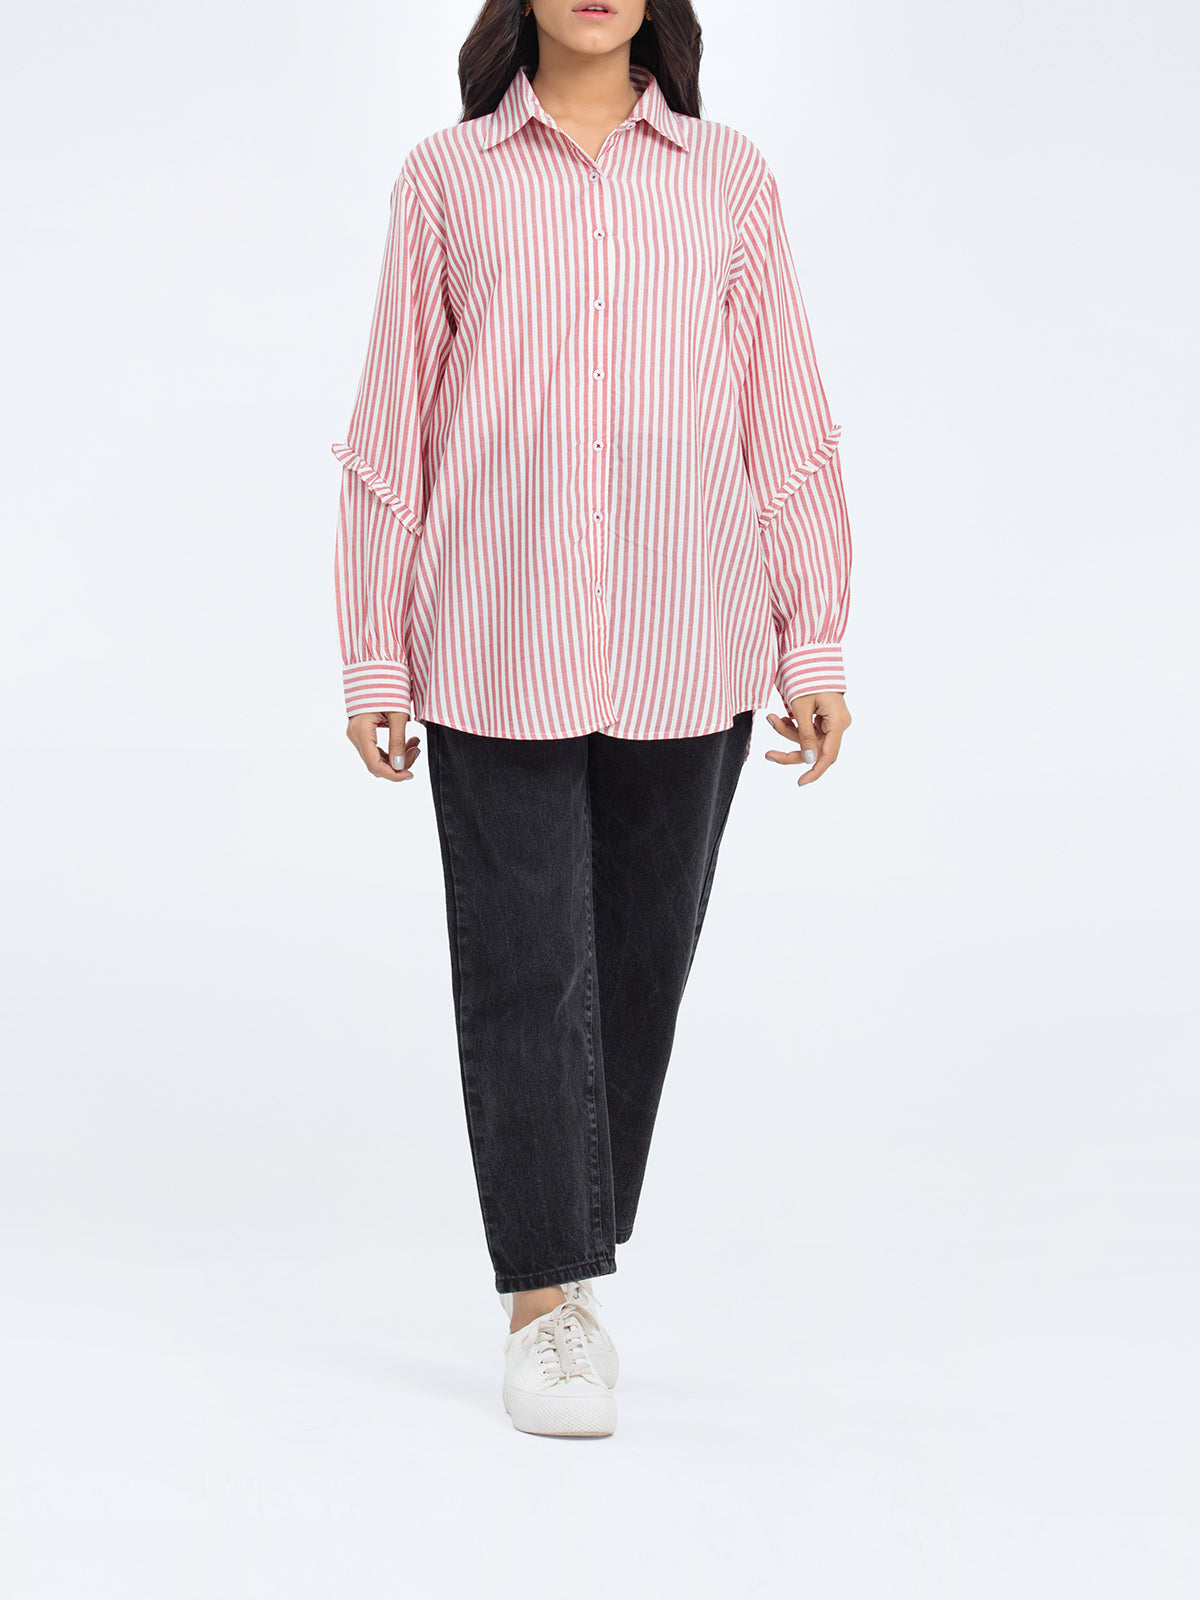 Relaxed Fit Yarn Dyed Shirt - FWTS24-047